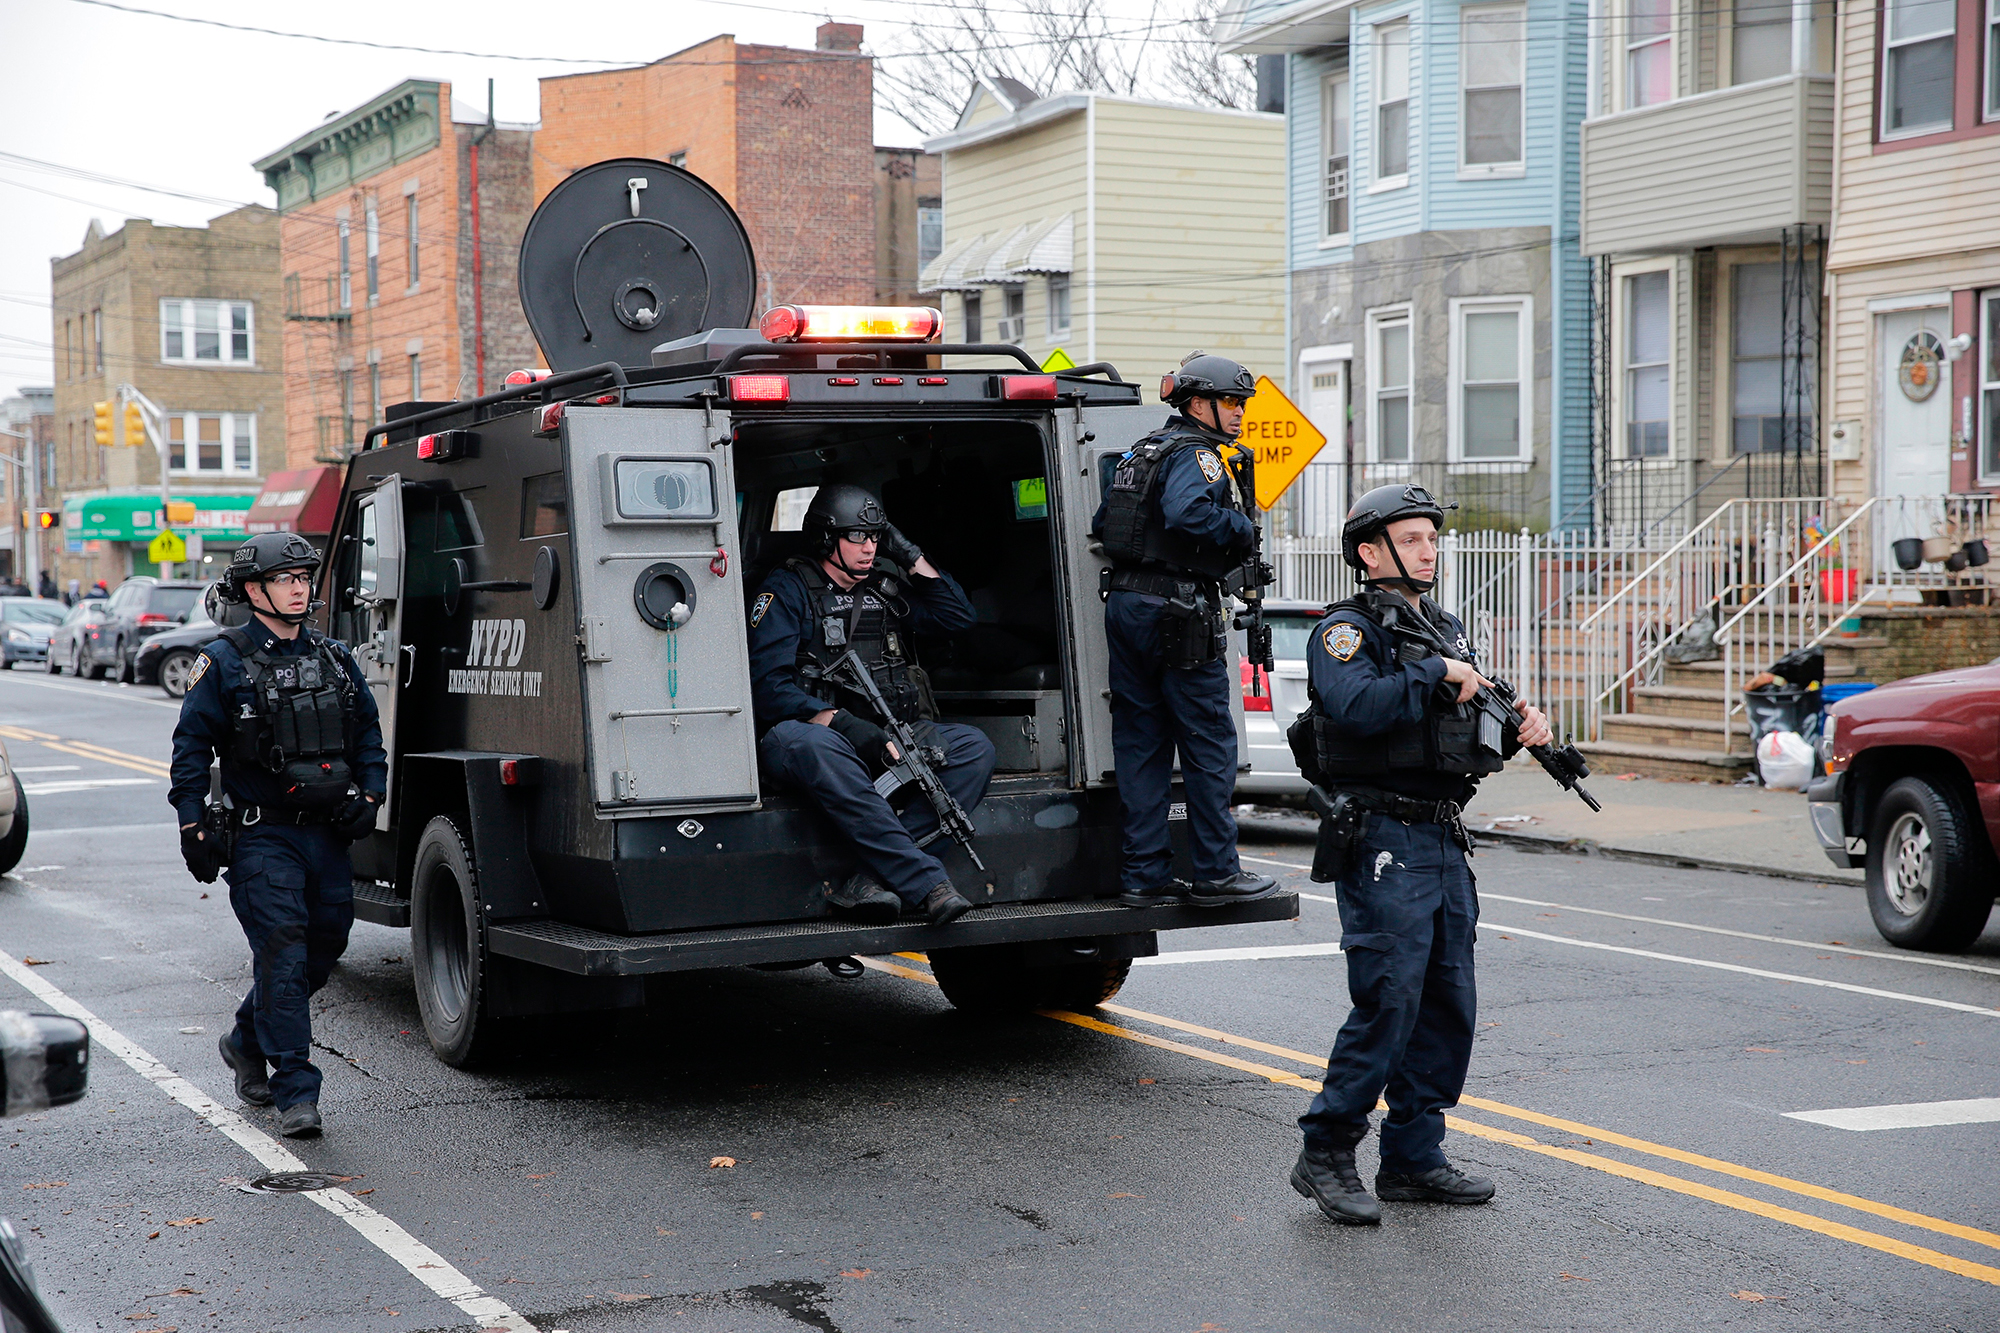 The New York Police Department Bomb Squad is responding to the active shoot...